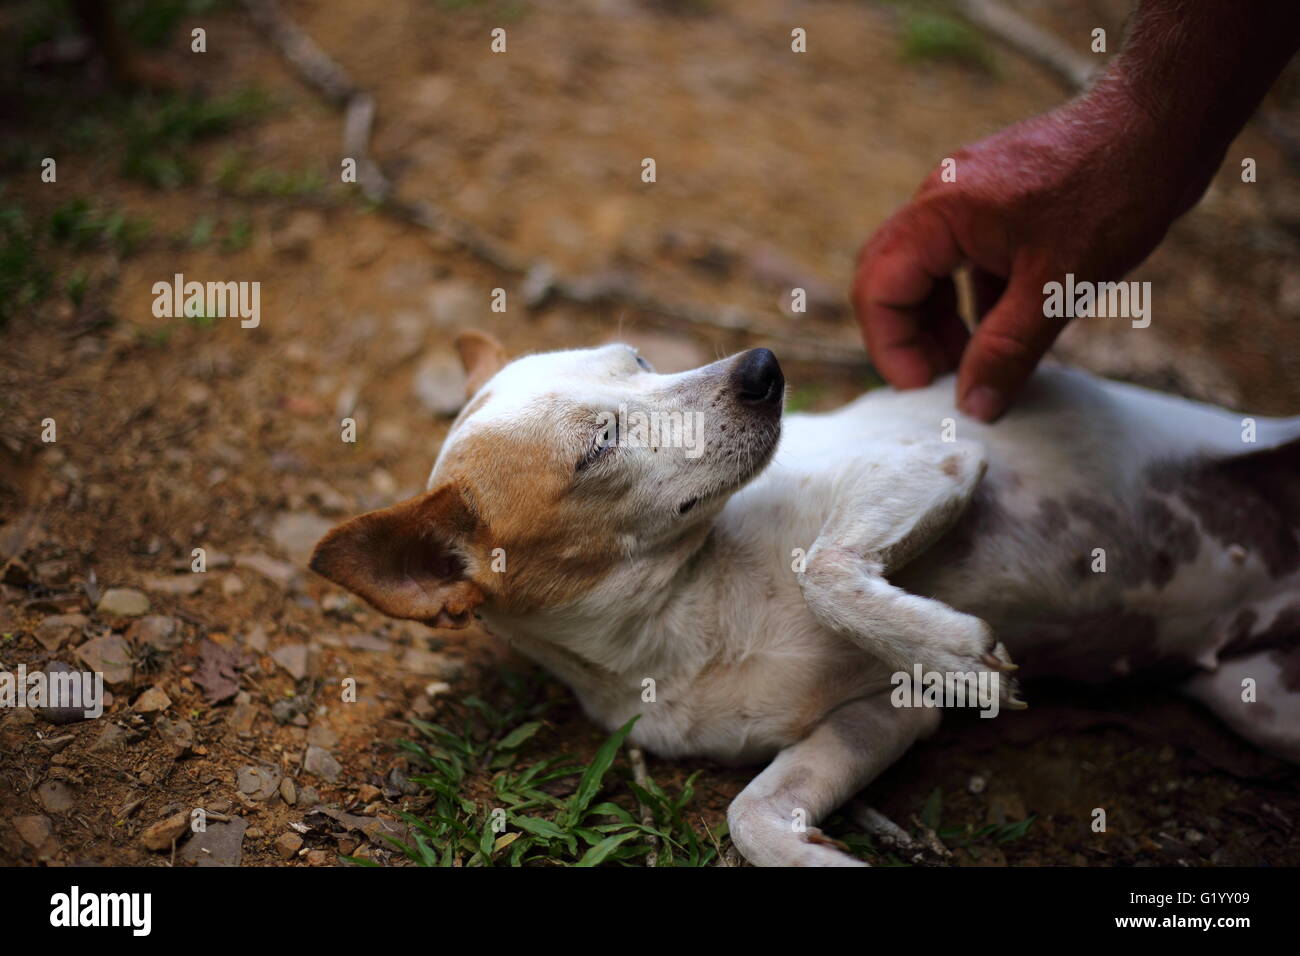 Little white dog being petted Stock Photo